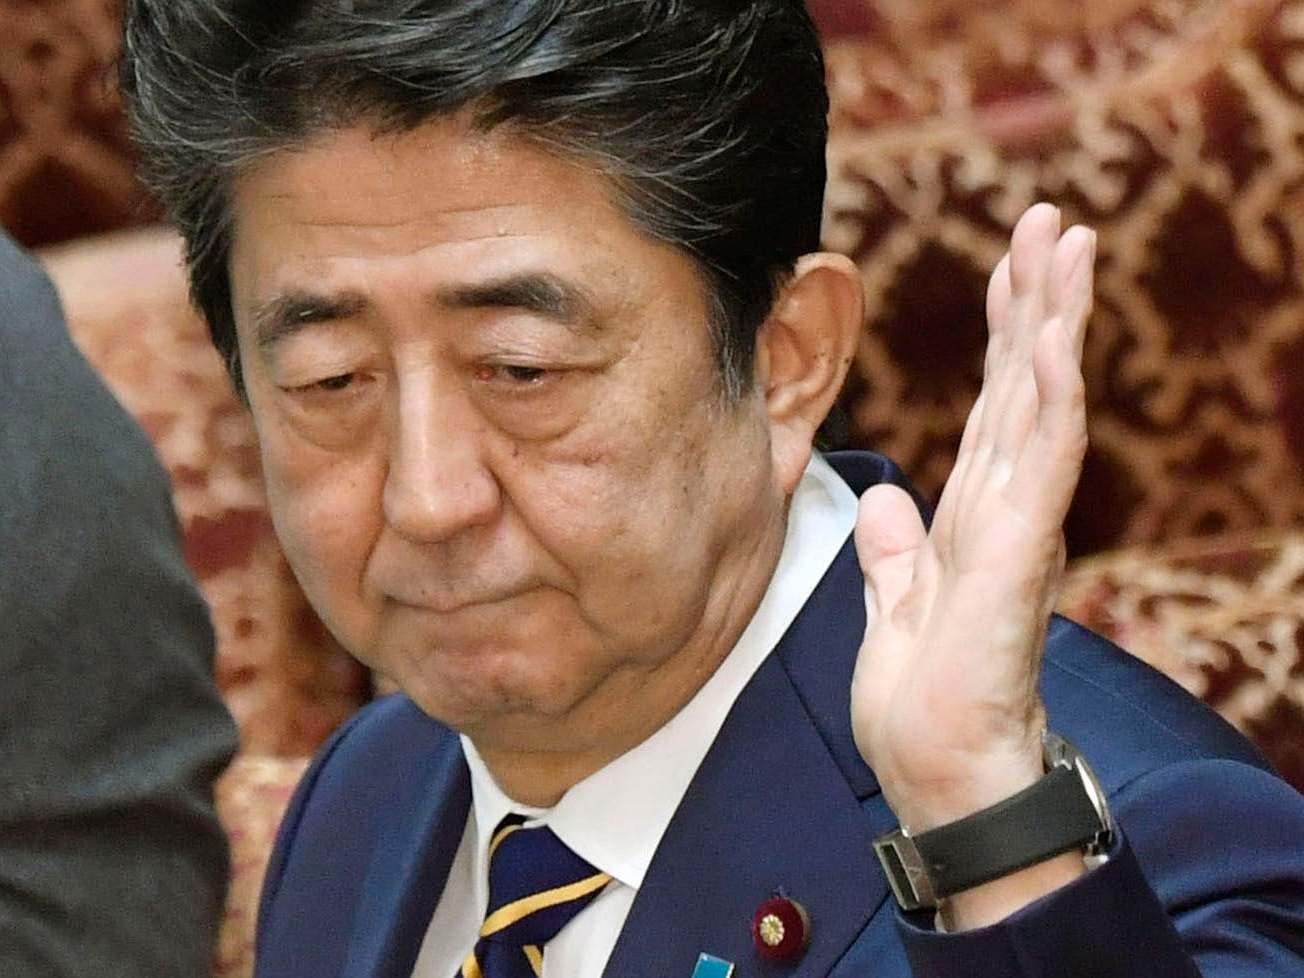 Japan’s Prime Minister Shinzo Abe has asked for a two-week ban on all major sporting events